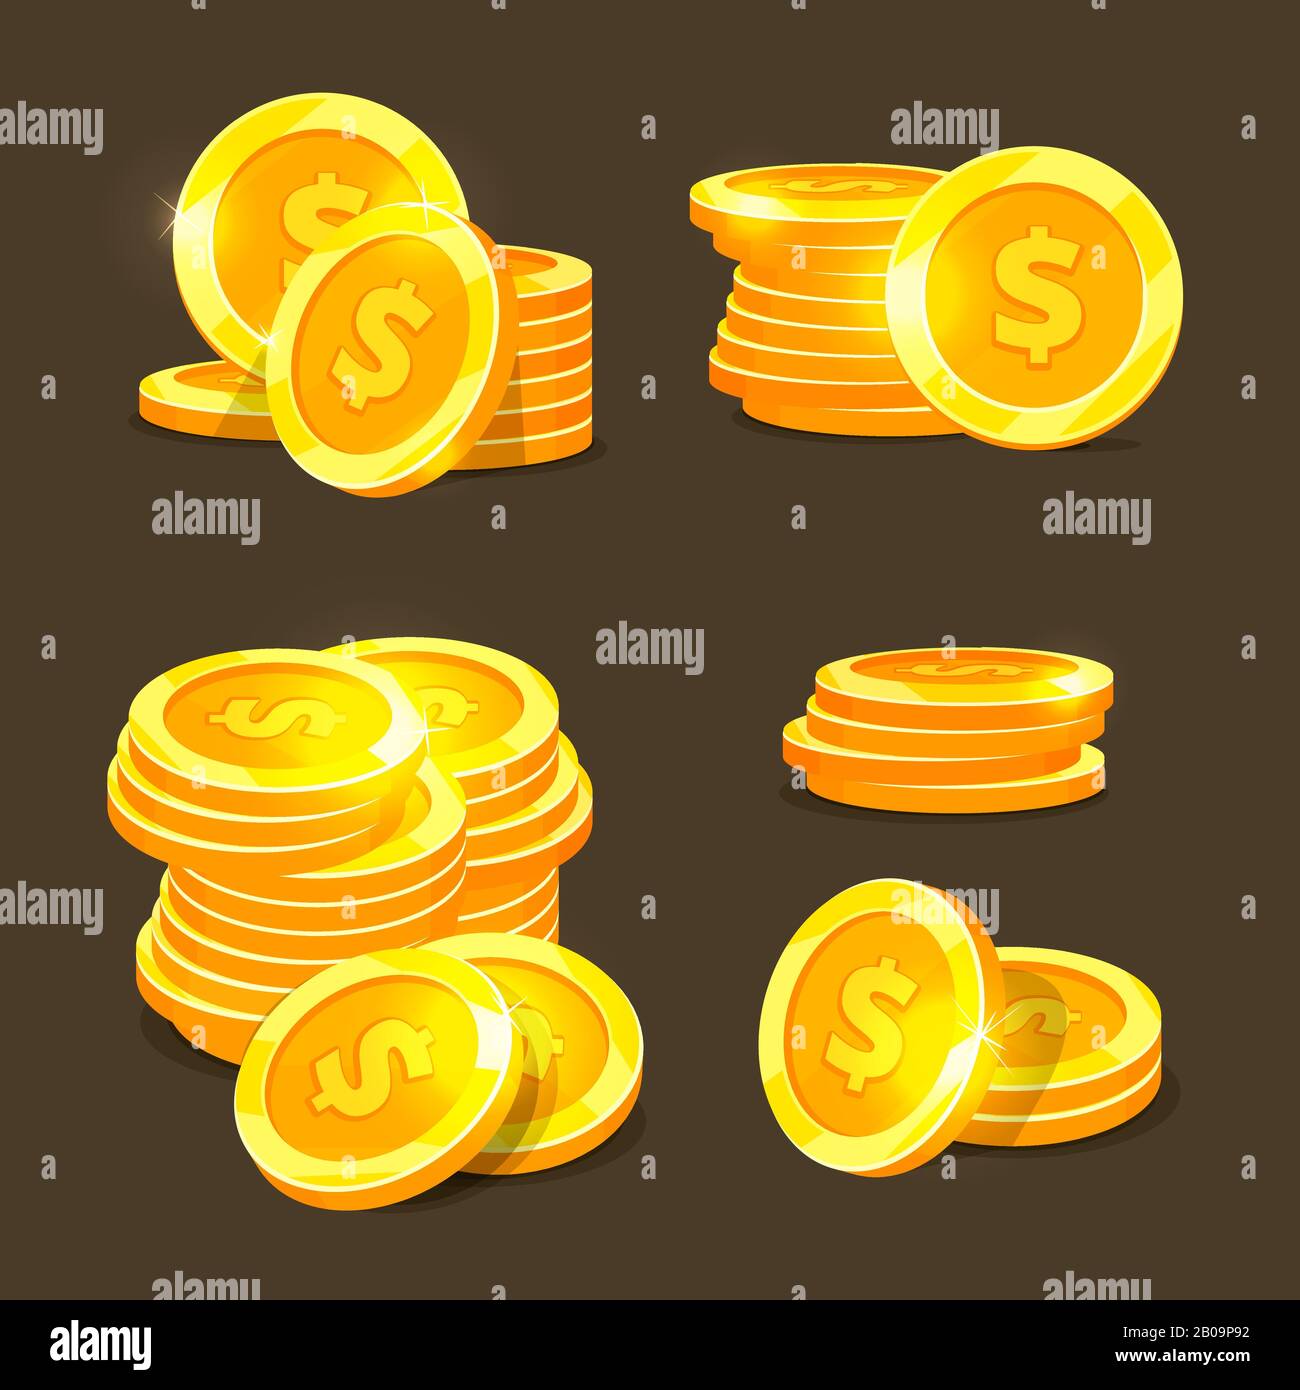 Gold coins vector icons, golden coins stacks and heaps. Illustration of finance coins dollar Stock Vector